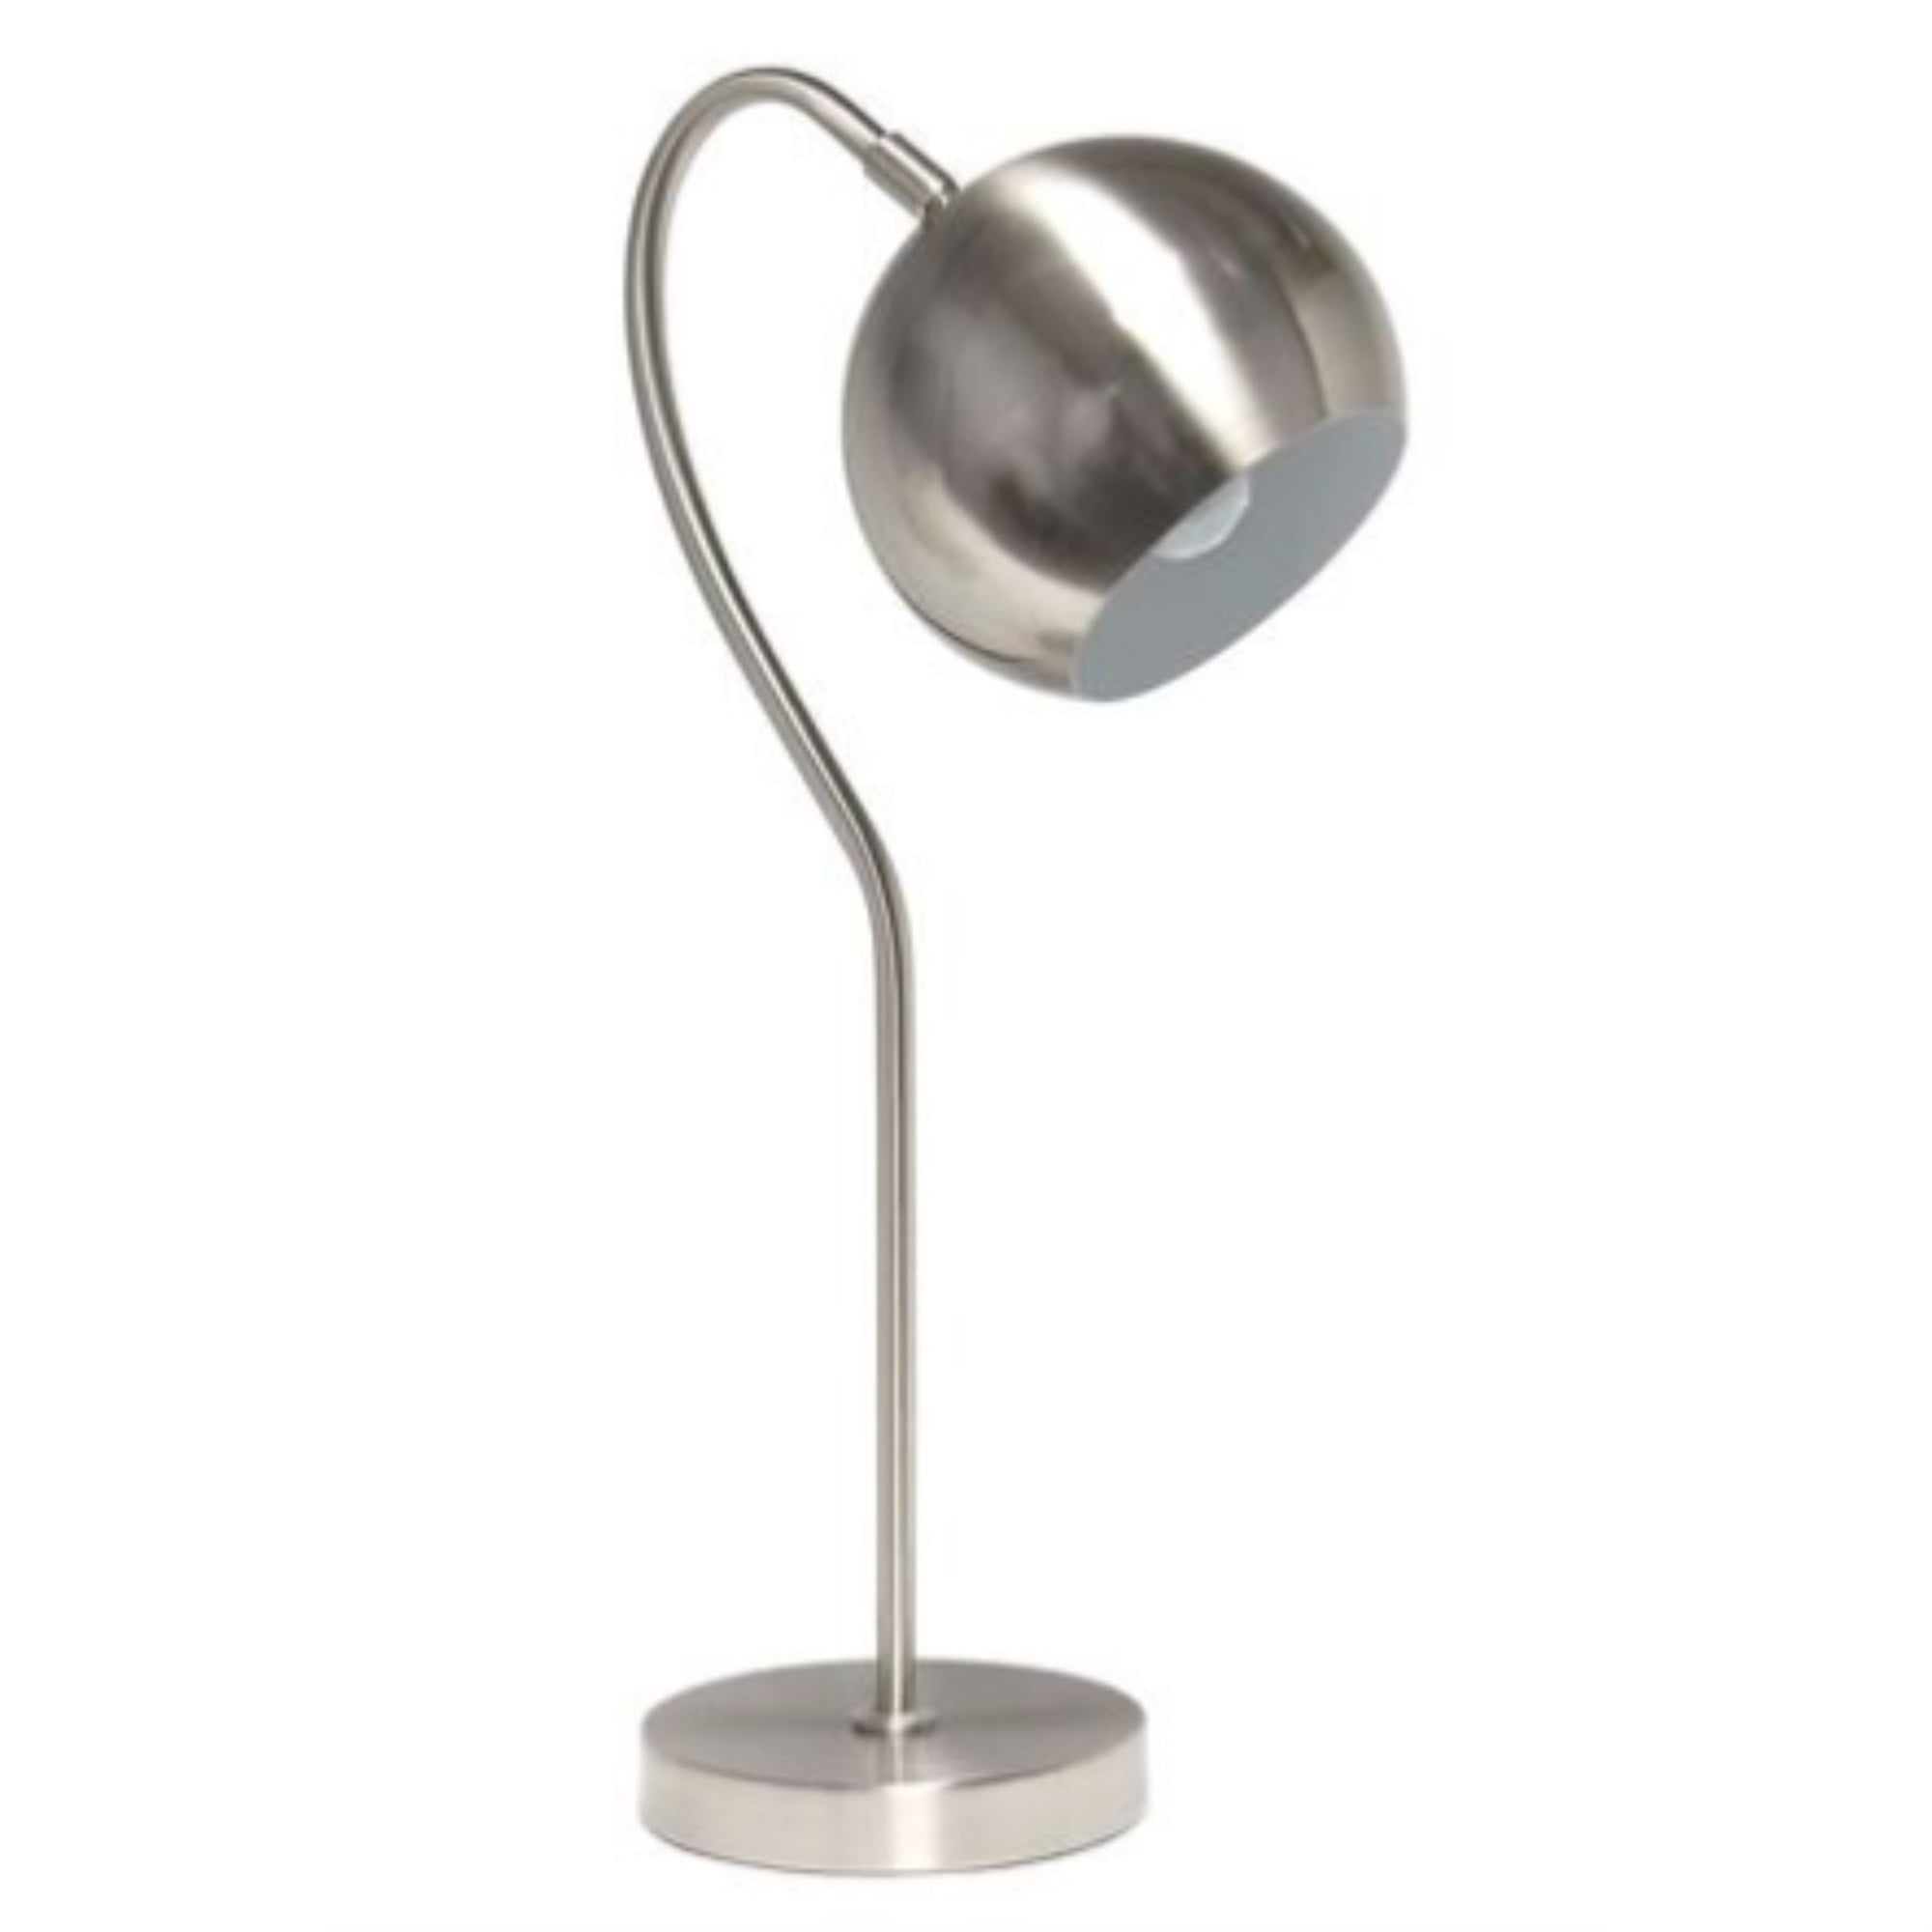 Lalia Home Mid Century Curved Table Lamp with Dome Shade, Brushed Nickel